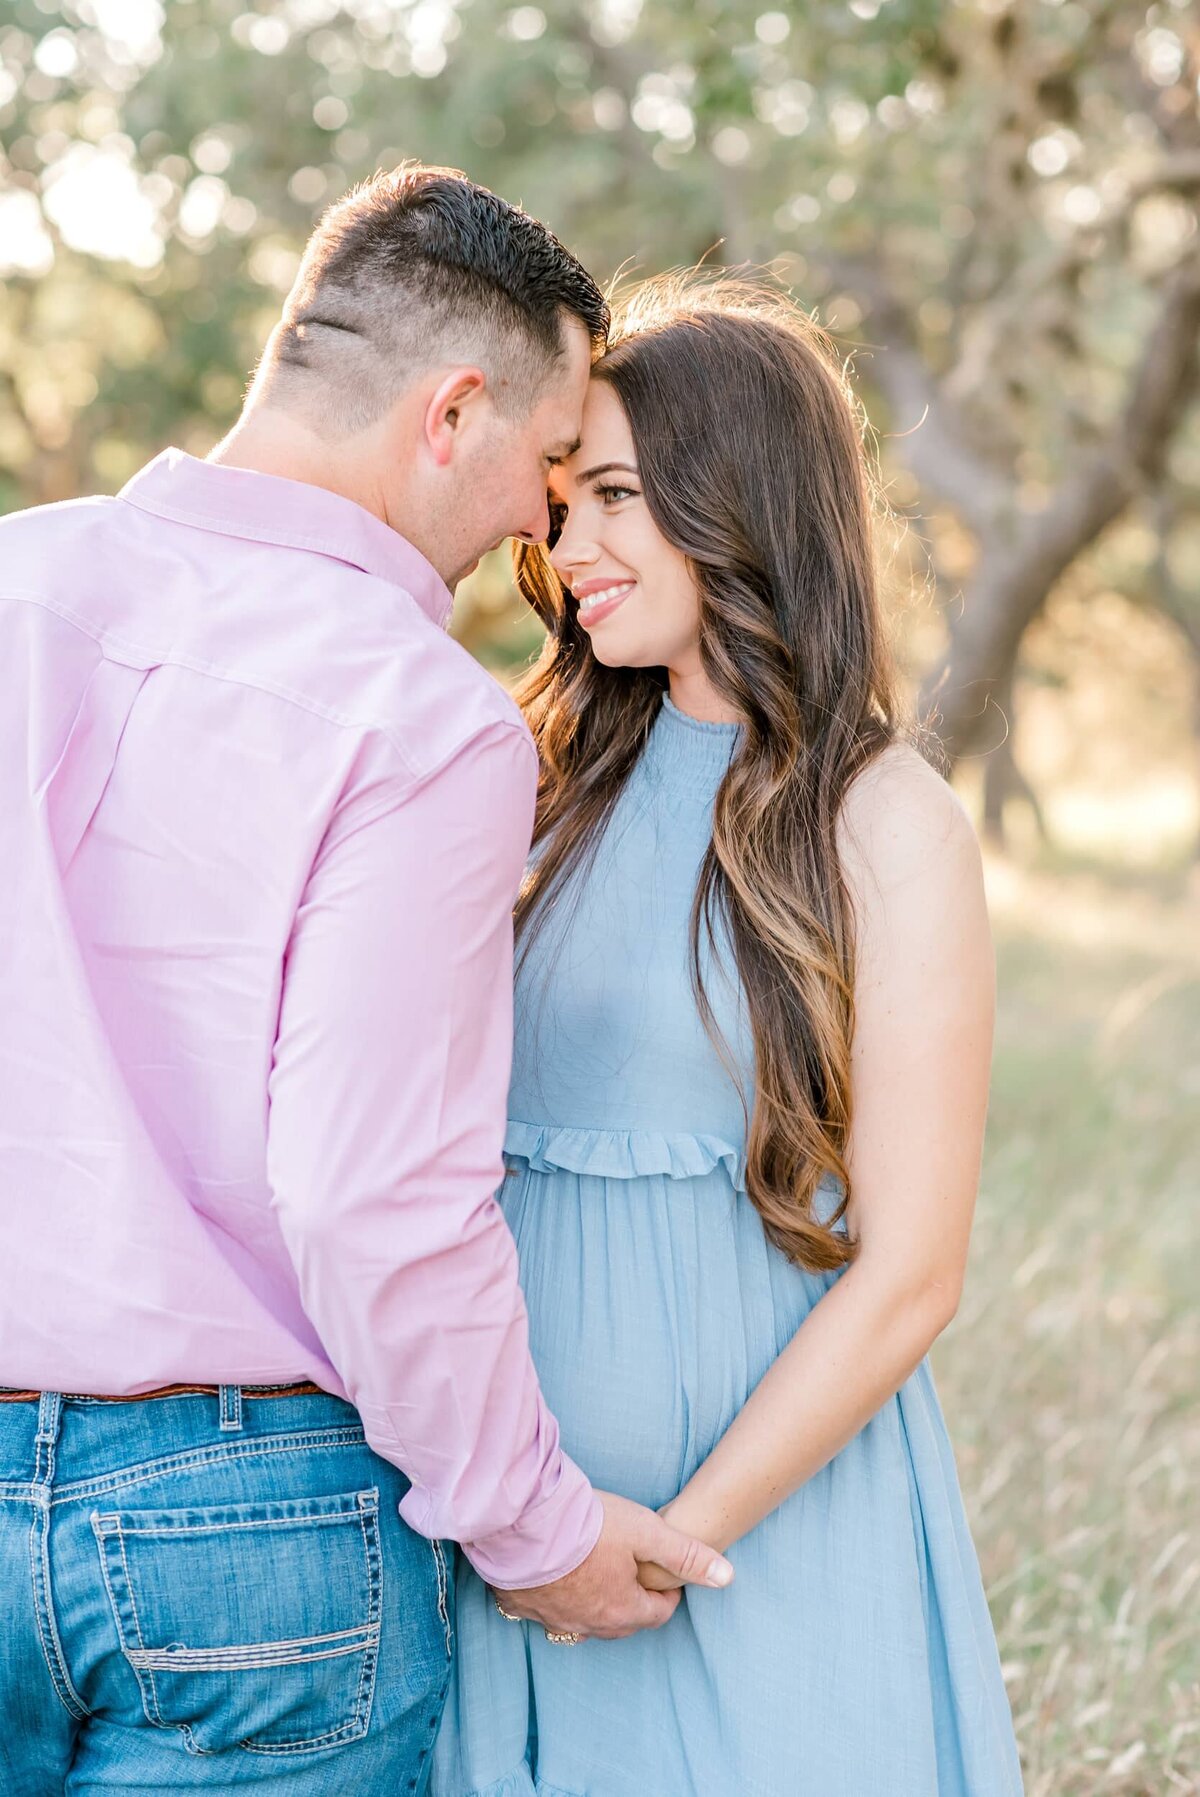 San-Antonio-Maternity-Photography-11.17.21 Sarah Maternity - Laurie Adalle Photography-69